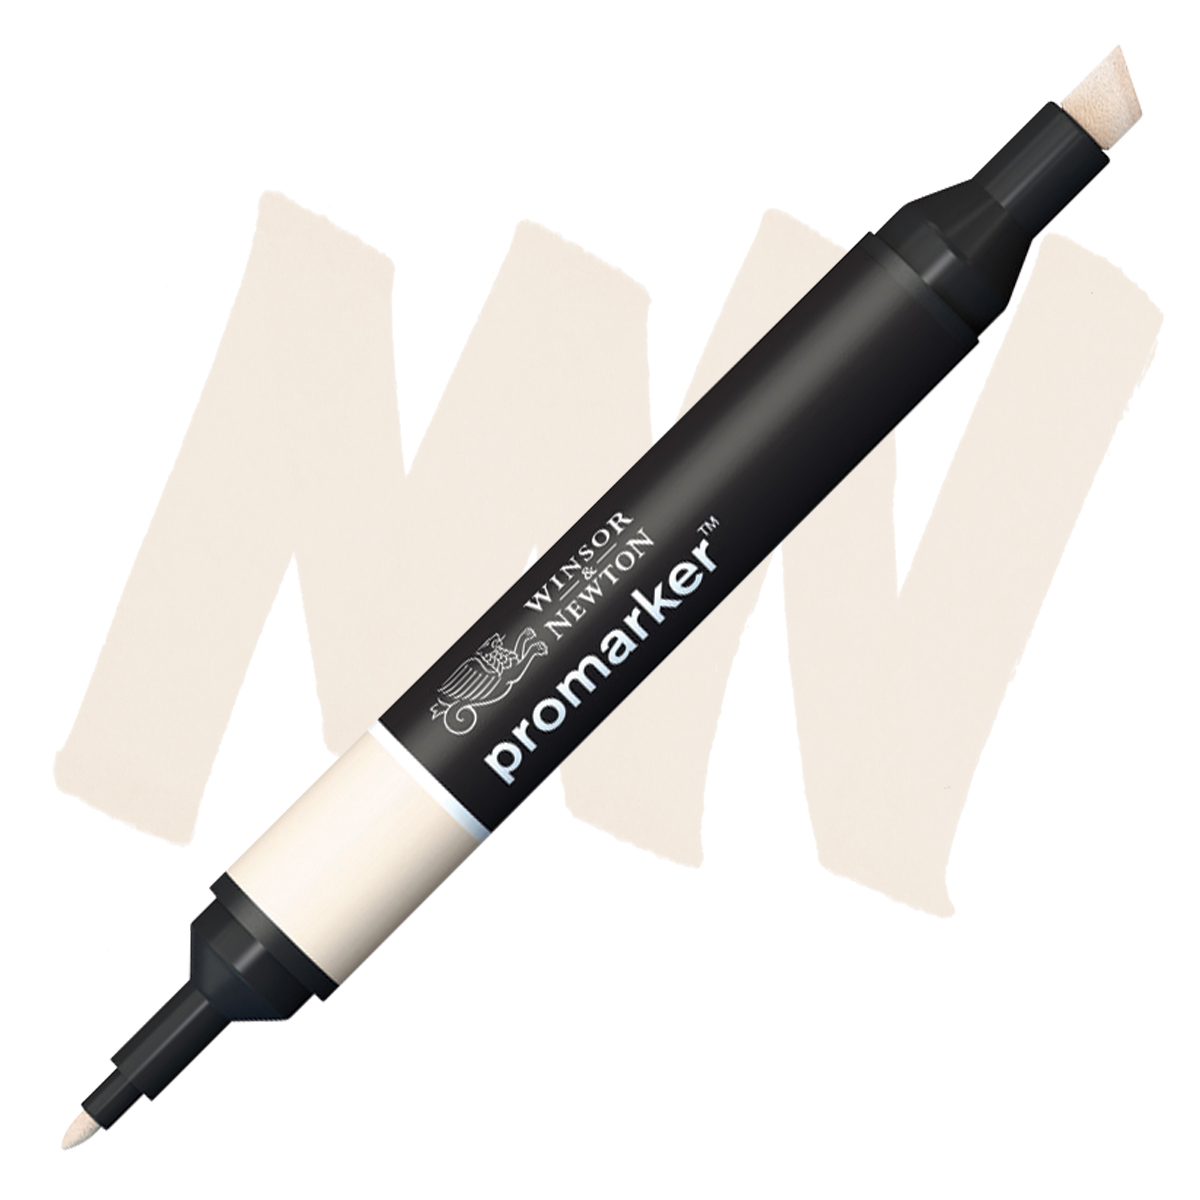 Winsor And Newton Promarker Sets Mixed Marker - 20445733